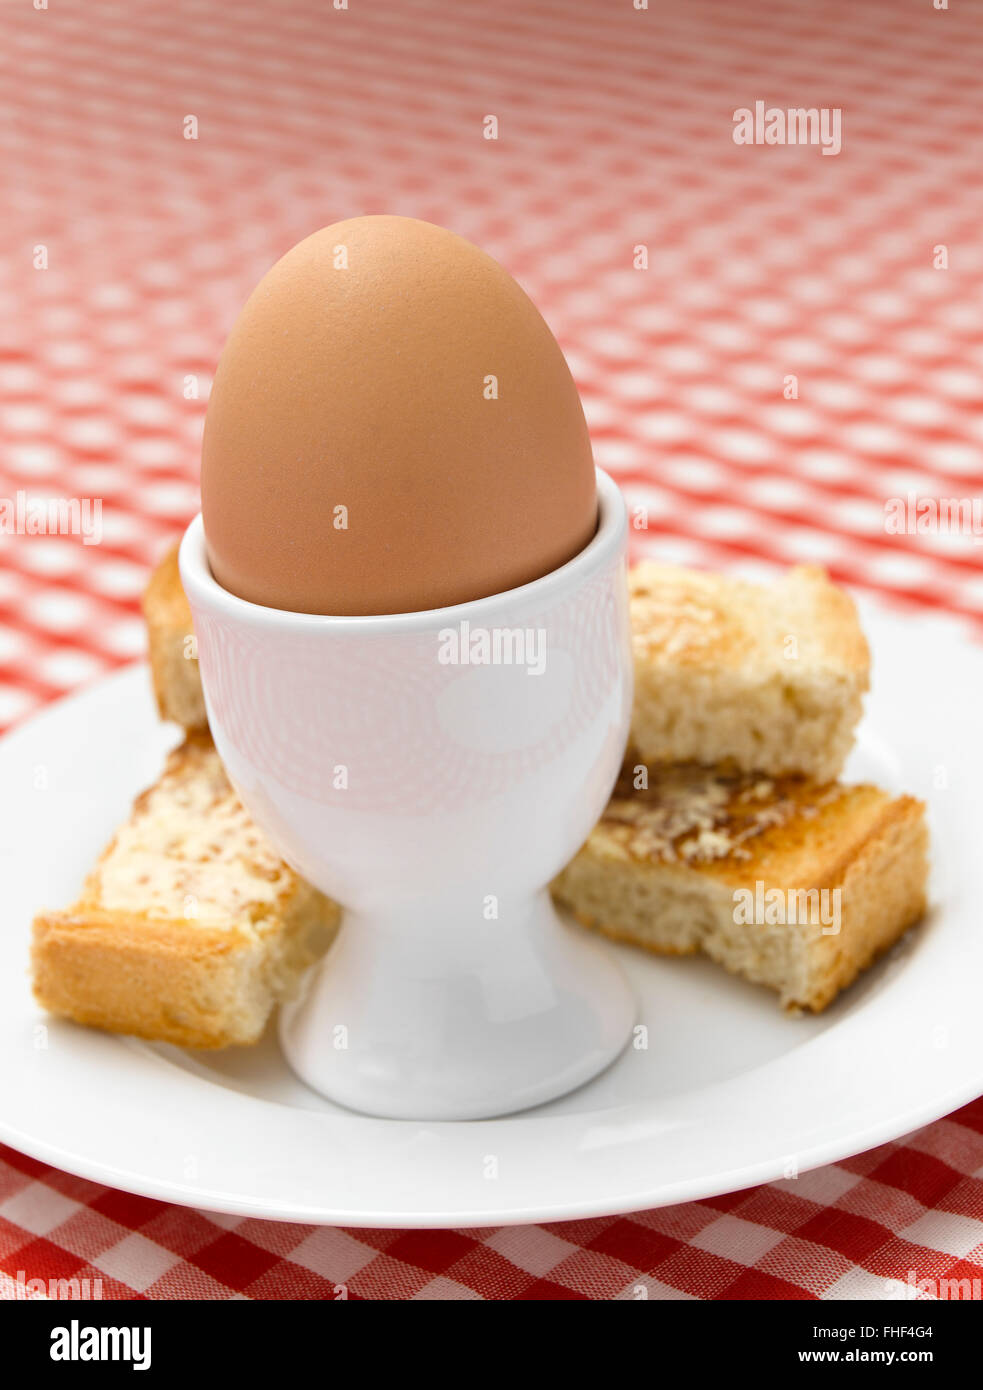 Boiled Egg on Gingham tablecloth Stock Photo